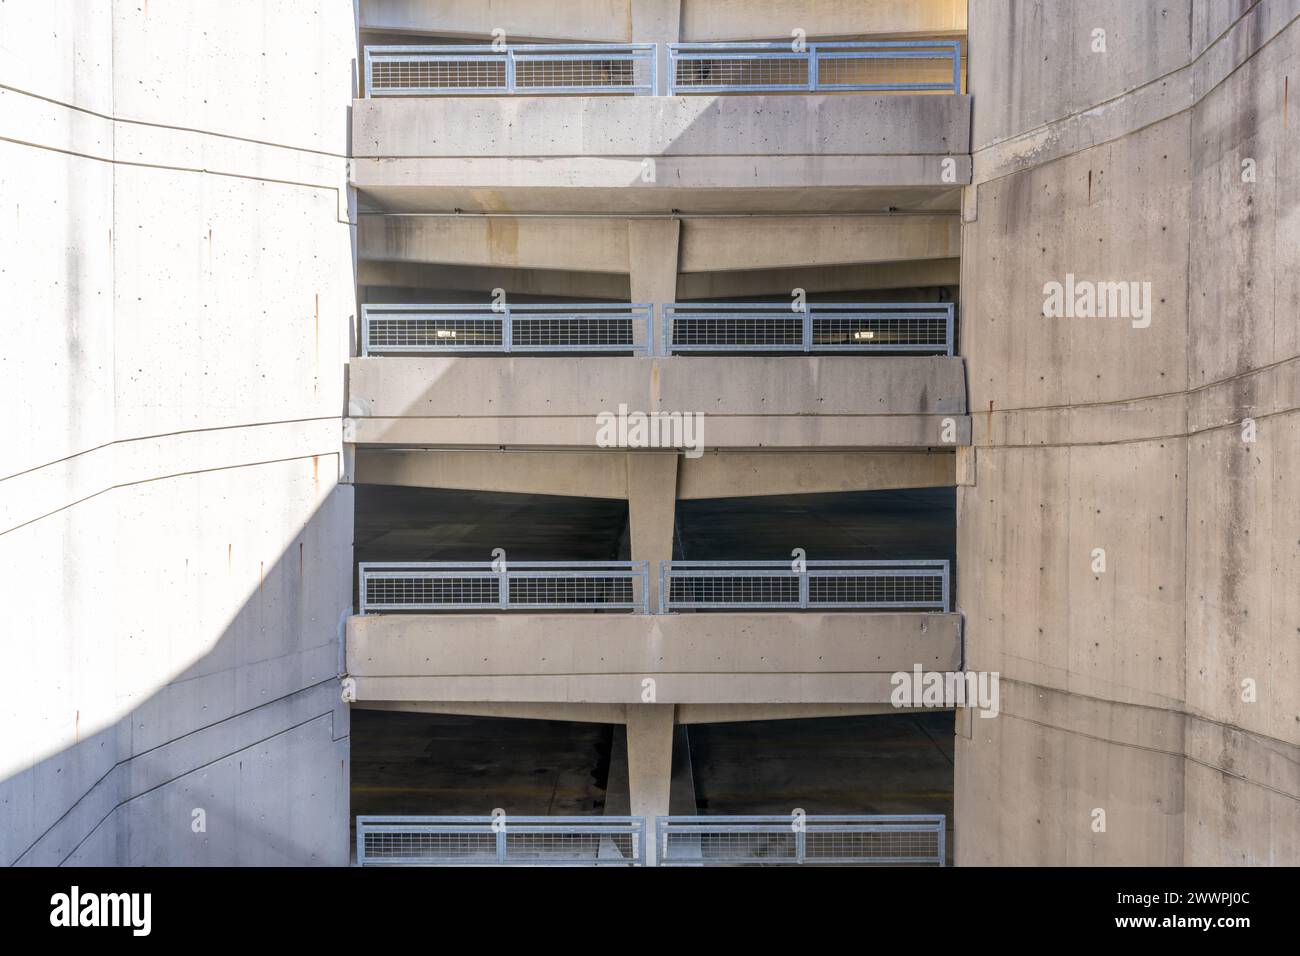 Elevation view of a multi level concrete parking garage, car park, during the day. Stock Photo